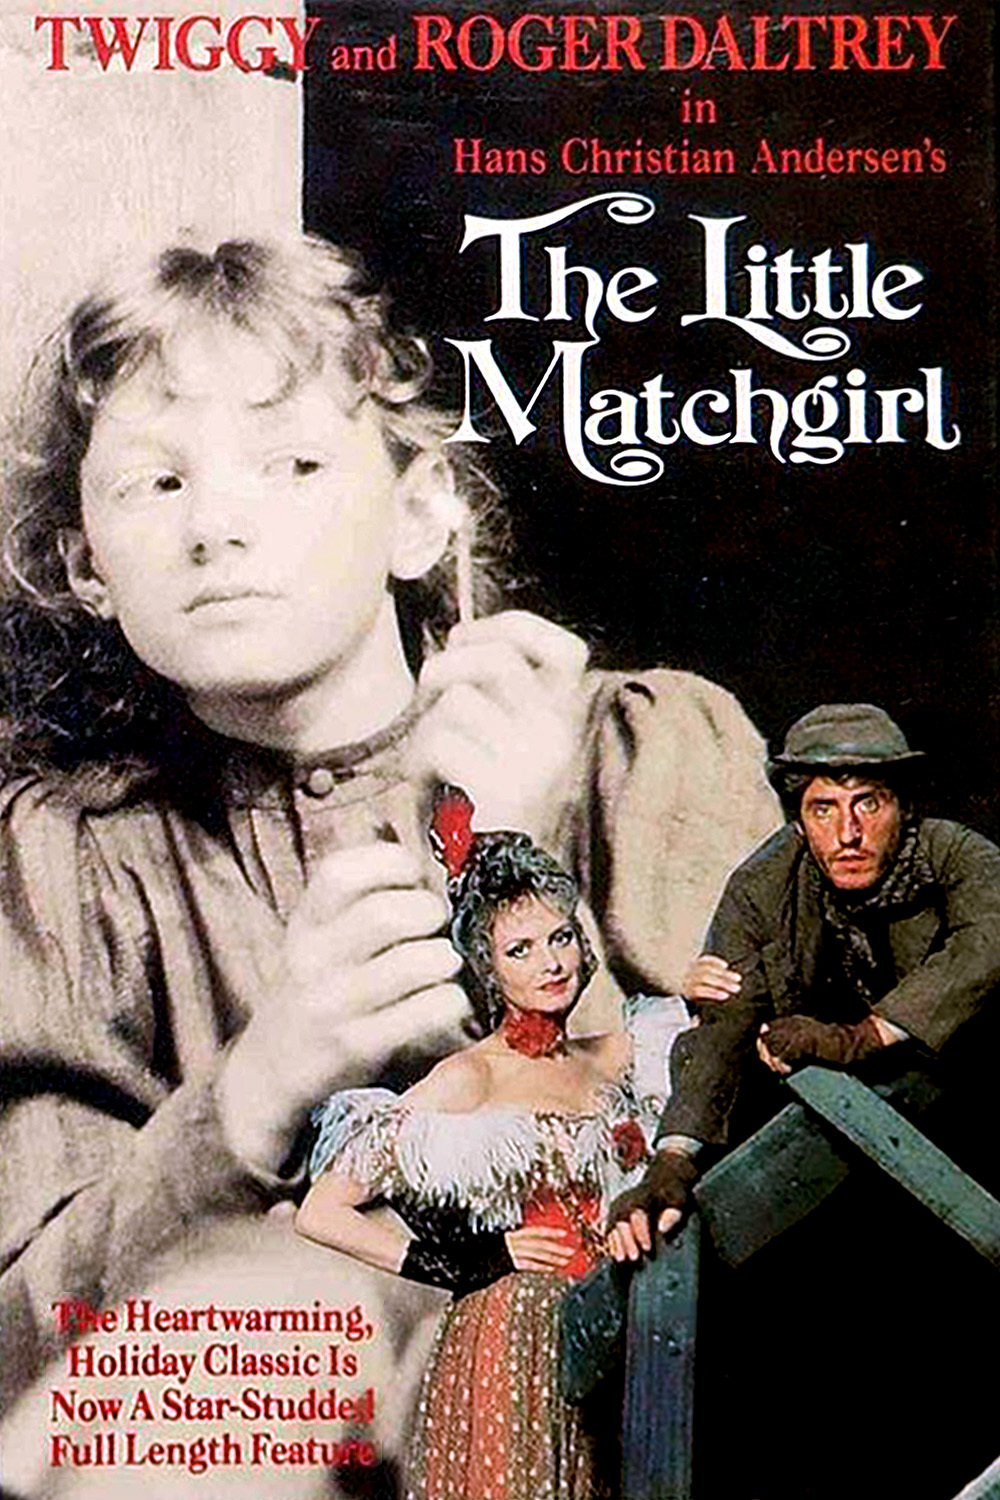 Poster for the movie "The Little Matchgirl"